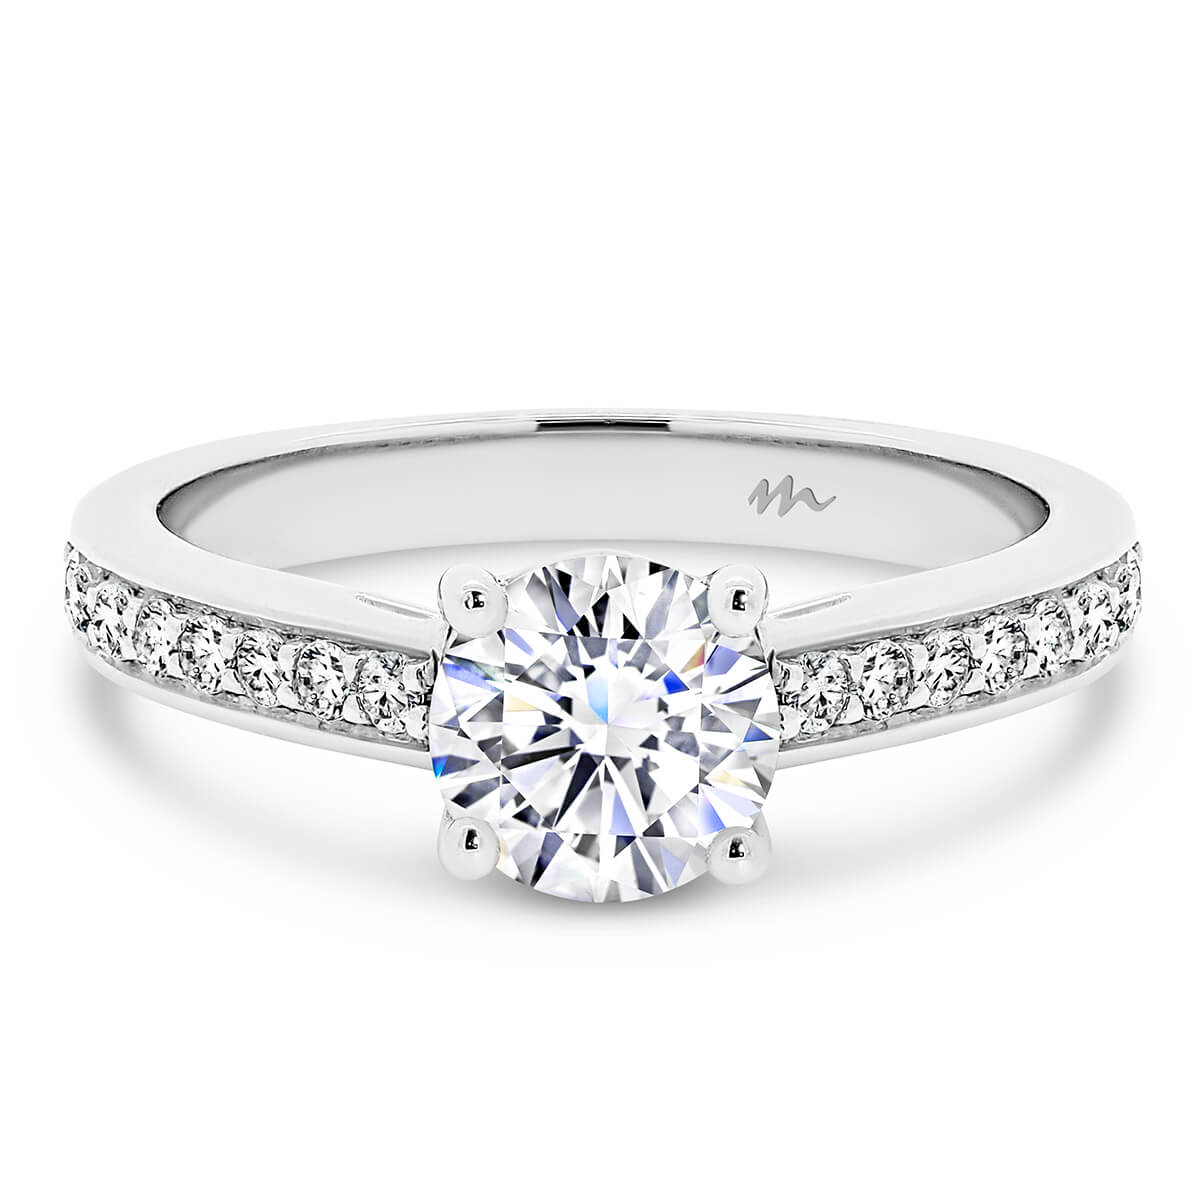 Bianca designed Moissanite ring with round centre stone and pave band.